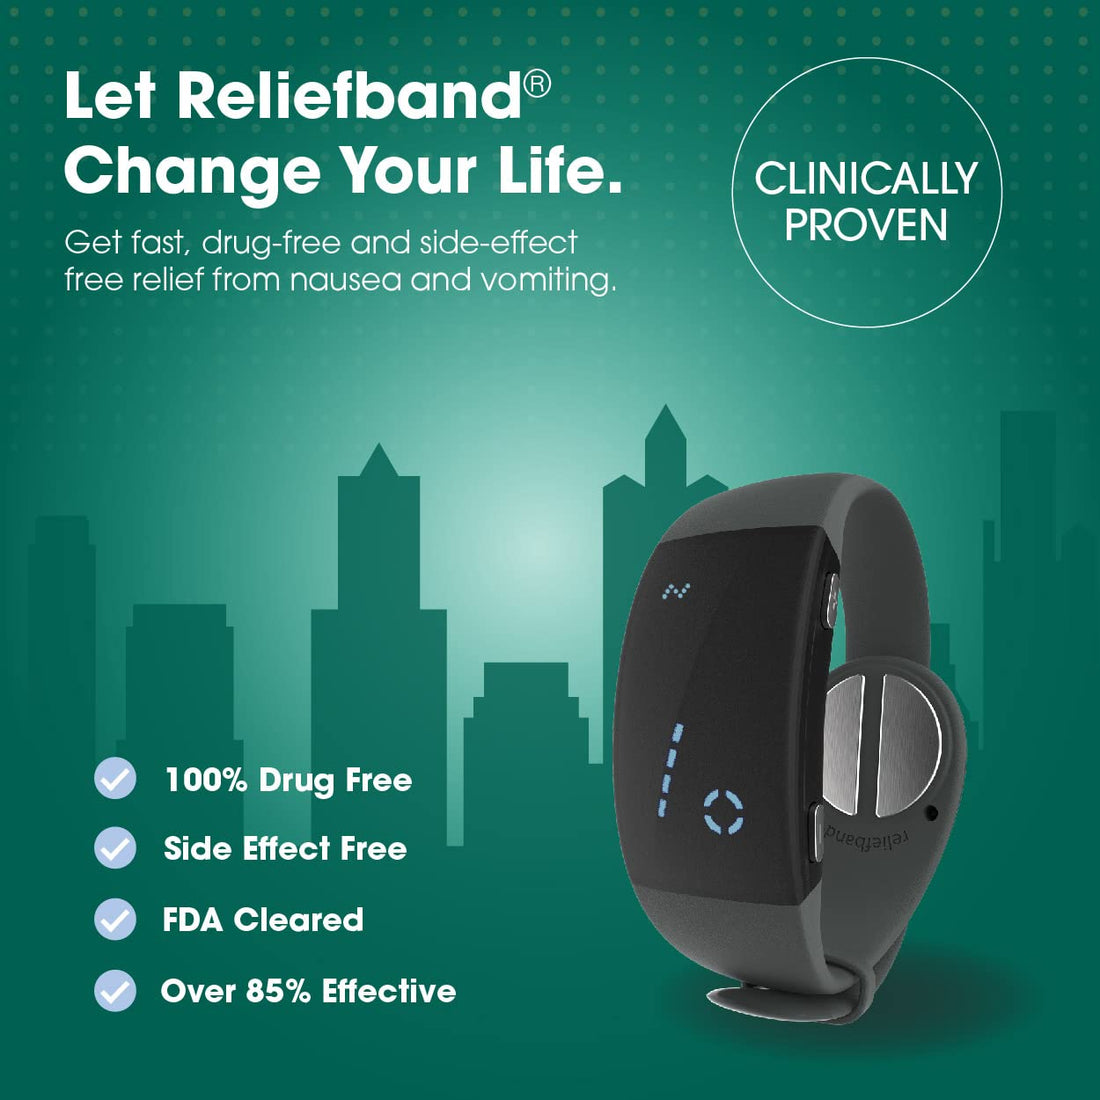 Reliefband Premier Motion Sickness Wristband- Updated w/New Features -Increased Battery Life -Easy-to-Use, Fast, Drug-Free Nausea Relief Band Helps w/Nausea & Vomiting (USB Charging Cable, Charcoal)